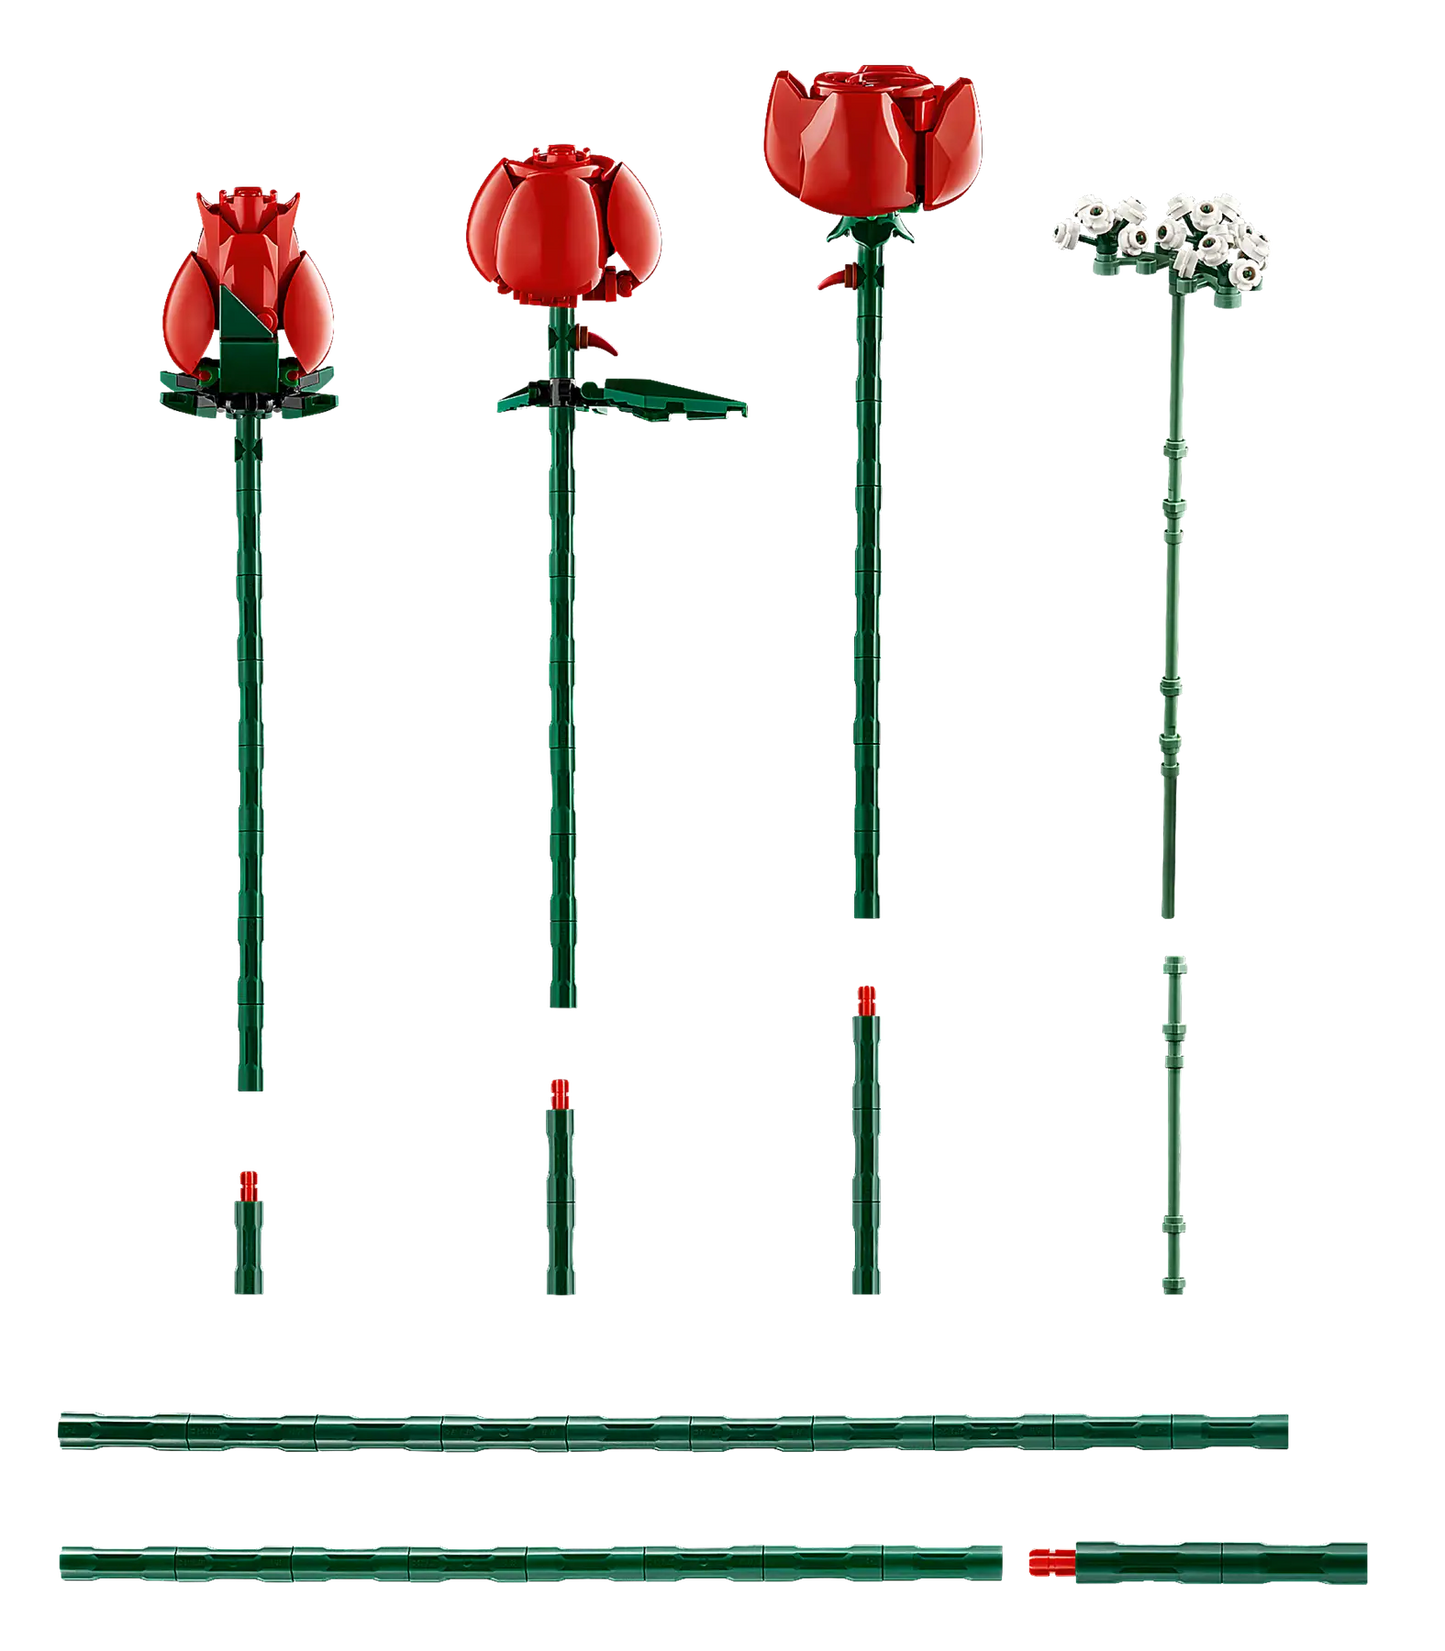 LEGO - ICONS - Bouquet of Roses - 10328